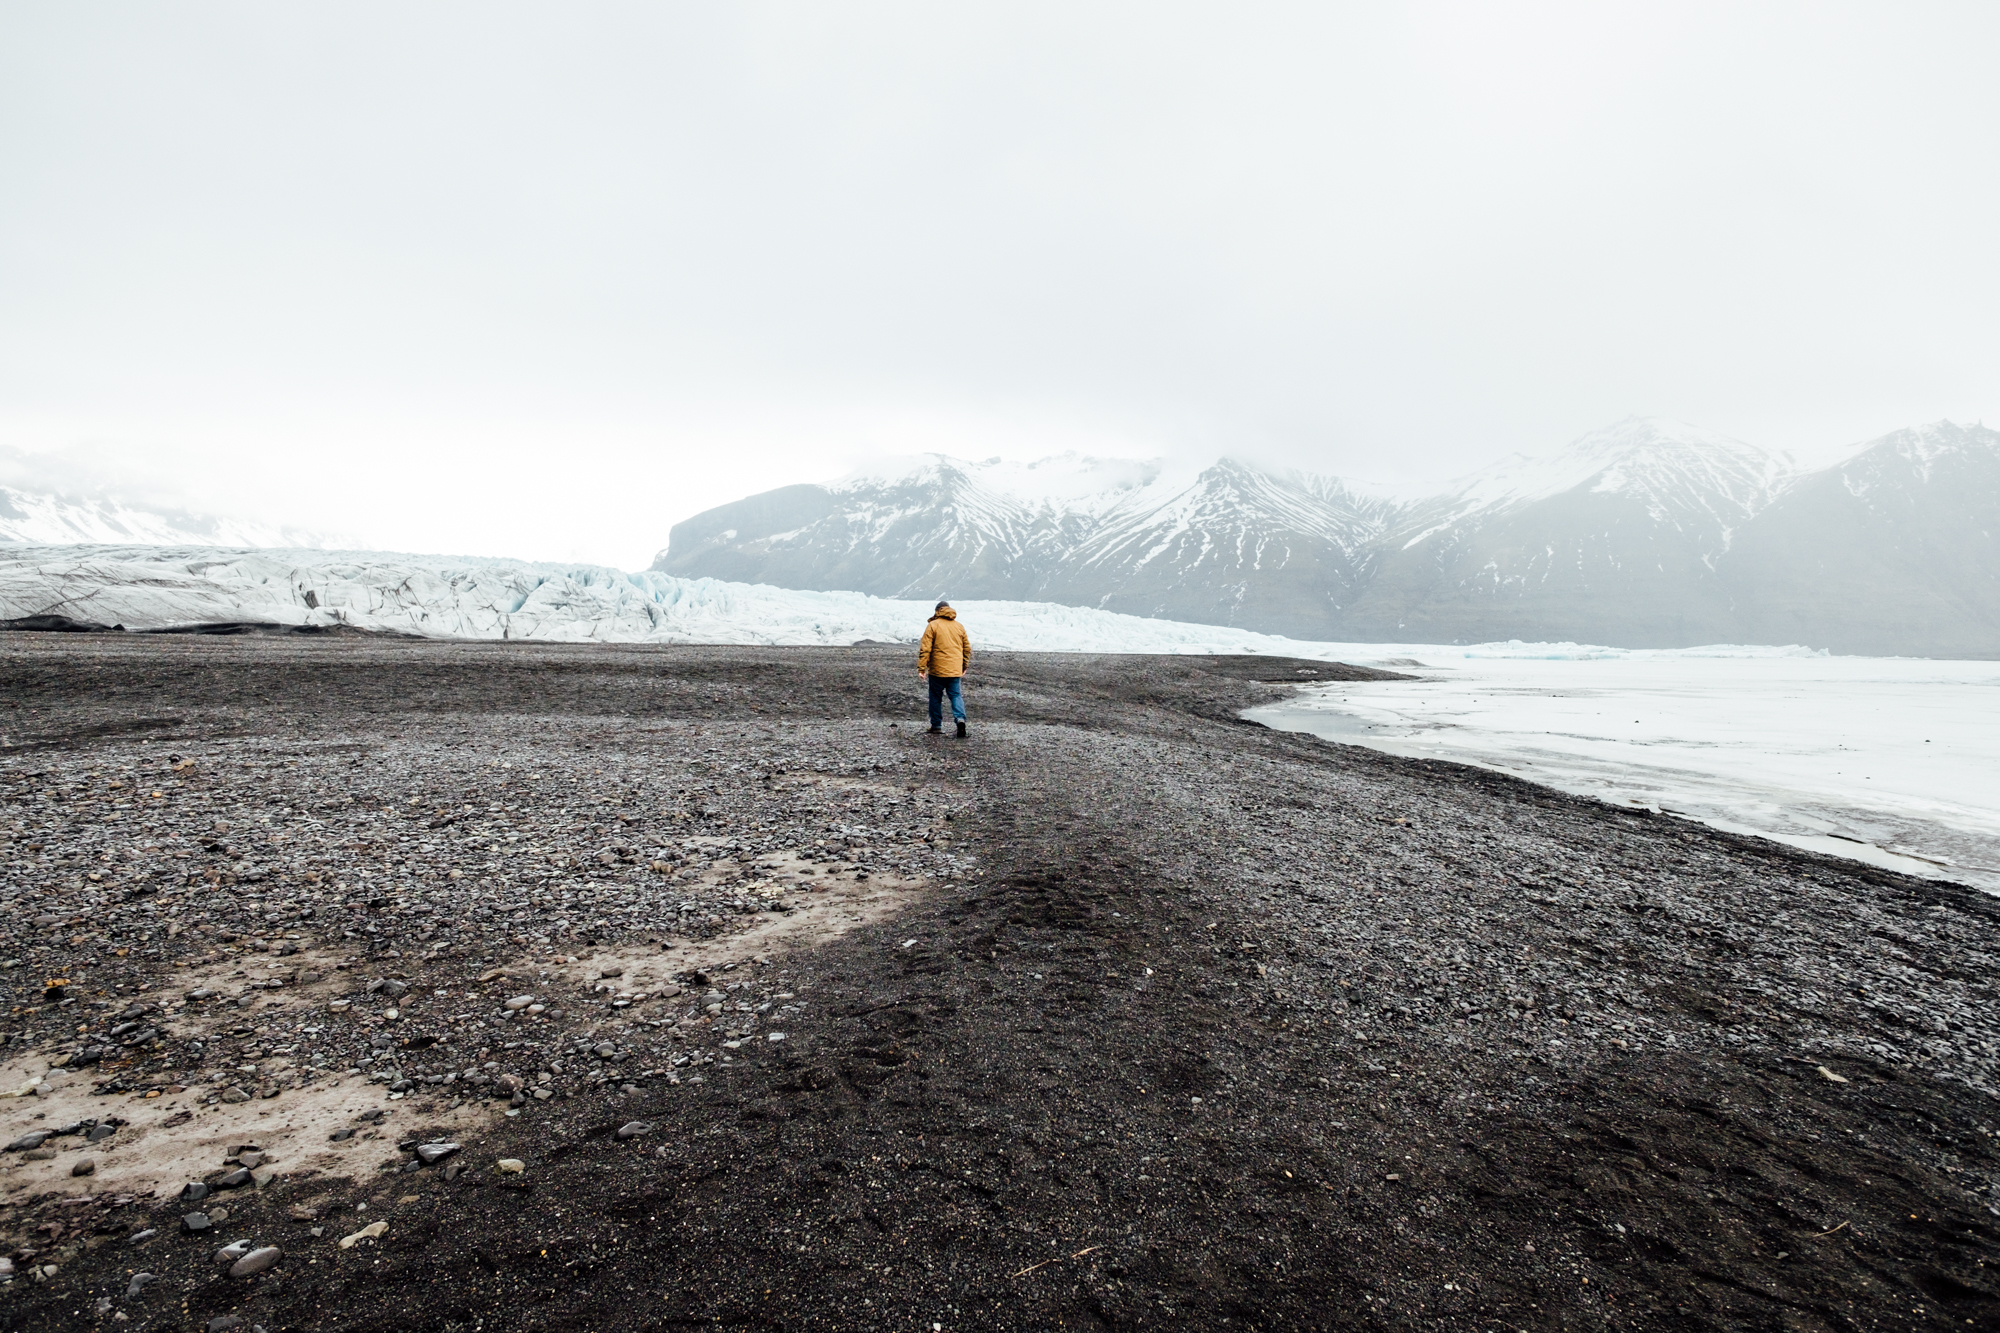  You’ll notice a trend of Jake walking ahead without me in many of my photos - life with a photographer girlfriend, I guess! We’re still wandering Skaftafellsjökull here. 